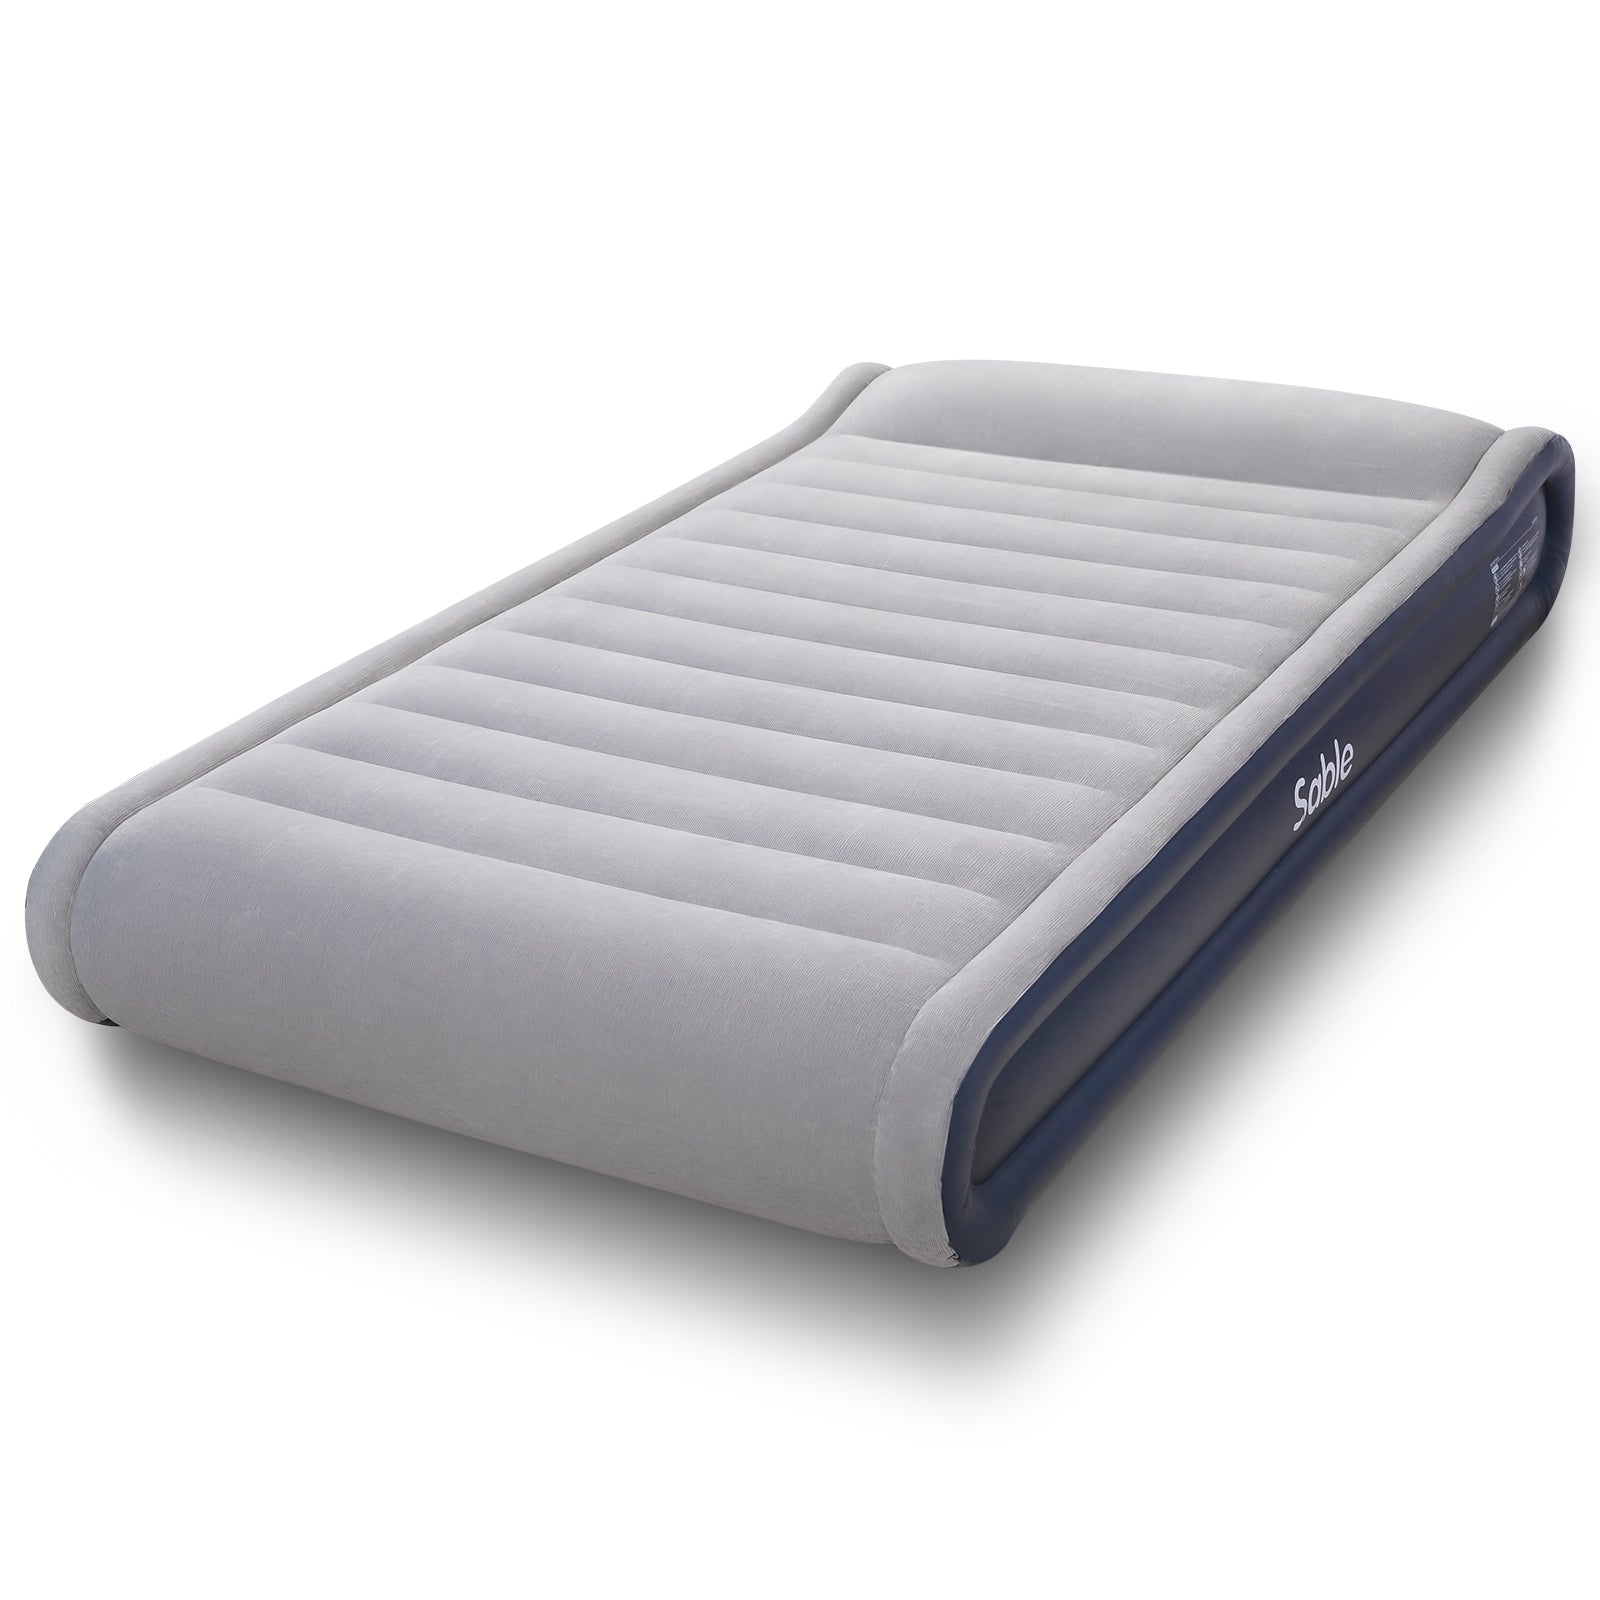 Full Size Air Mattress with Built in Pump Easy to Inflate/Quick Set Up Inflatable Mattress Double High Strong Support Air Bed with Headboard-TaoTronics US